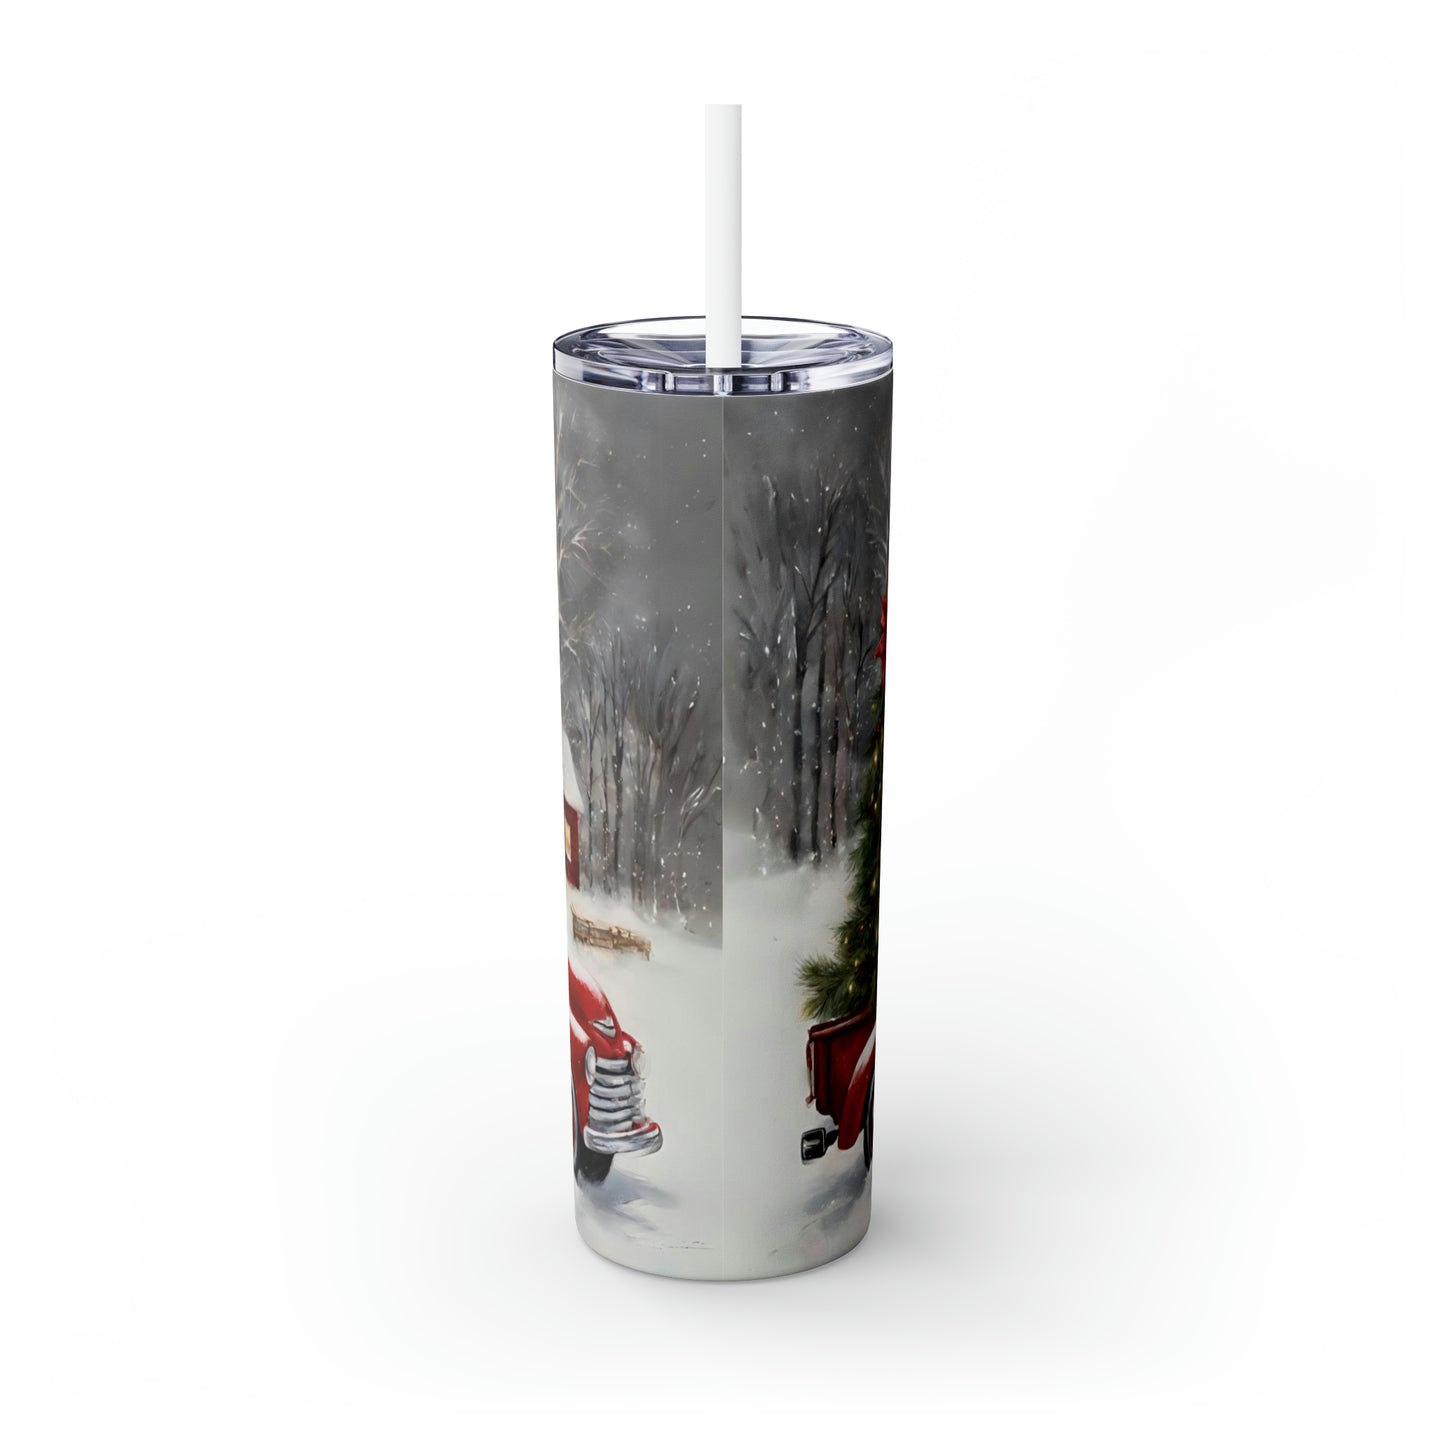 Country Christmas Truck - Skinny Tumbler with Straw, 20oz